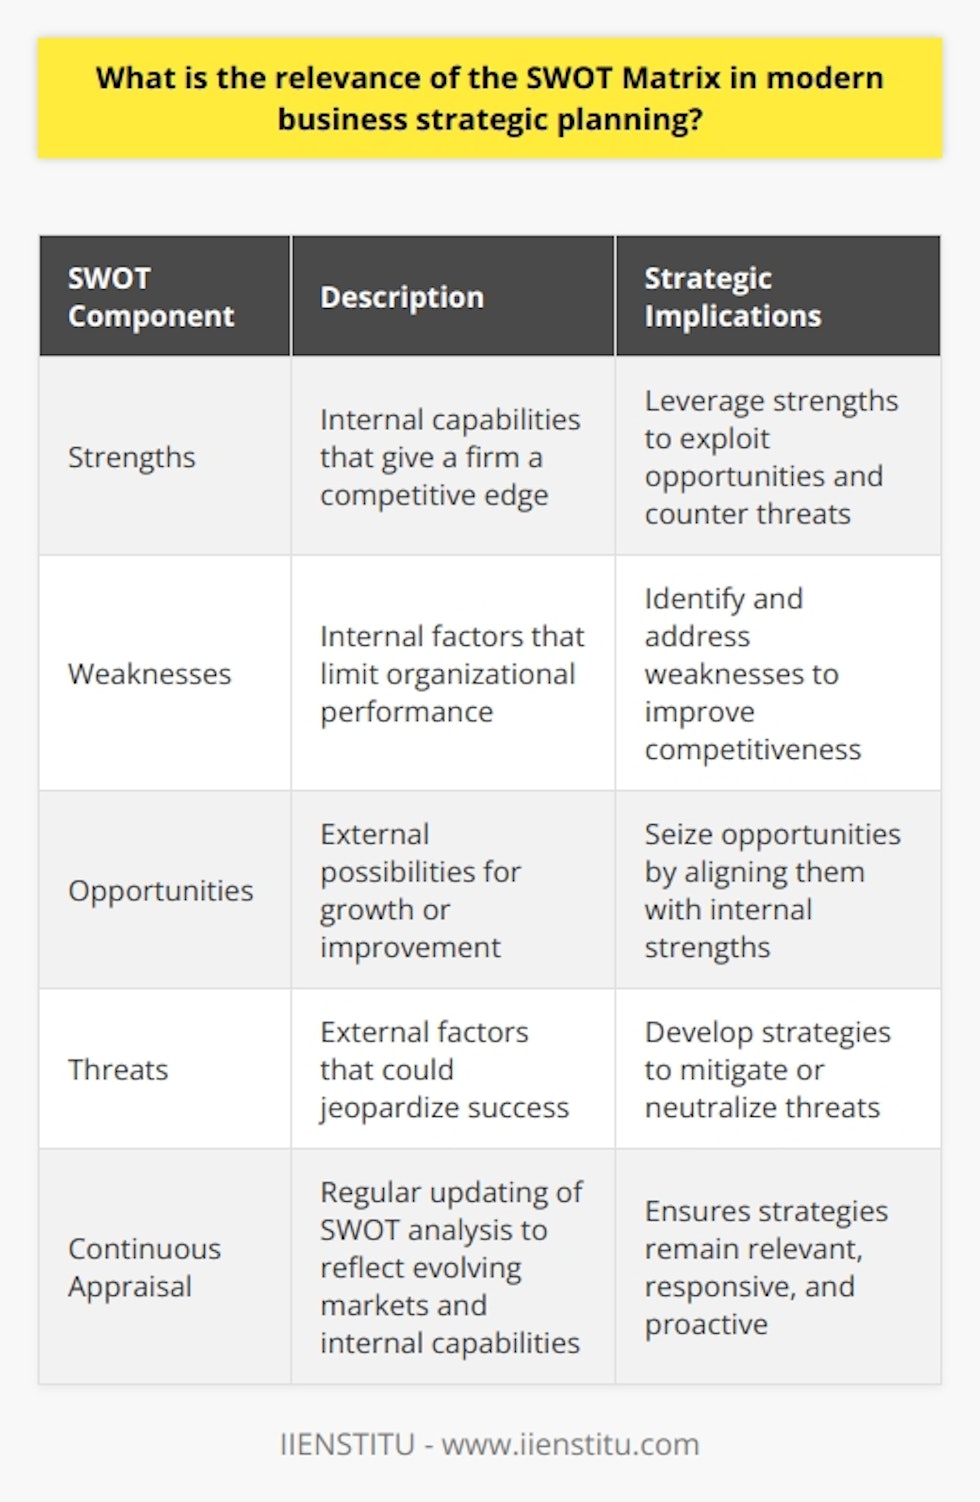 Understanding the SWOT Matrix The SWOT Matrix remains a cornerstone in business strategy formulation. Its simplicity belies its profound utility. Firms leverage the SWOT framework to dissect their competitive landscapes and internal competencies. The SWOT analysis compels organizations to introspect and scrutinize their external environments. SWOT Composition and Strategic Influence The matrix breaks down into four quadrants. Each signifies a unique aspect of business analysis.  Strengths  denote internal capabilities giving firms a competitive edge.  Weaknesses  are internal factors that limit organizational performance.  Opportunities  encompass external possibilities for growth or improvement.  Threats  reflect external factors that could jeopardize success. This matrix guides strategic planning by aligning internal traits with external realities. It aids in crafting a strategy that exploits strengths and opportunities. It also mitigates weaknesses and threats. SWOT in Contemporary Business Landscapes Modern businesses function in dynamic environments. They require tools that are both flexible and holistic. The SWOT Matrix fits this need perfectly. It allows teams to pinpoint where a business excels, where it falters, its prospects, and its risks. Organizations adapt by acknowledging these elements and devising appropriate strategies. Leaders must update their SWOT analyses regularly. Markets evolve, as do internal capabilities. Continuous SWOT appraisal ensures strategies remain relevant and responsive. It enables proactive rather than reactive planning. Applications Beyond Corporate Strategy SWOT extends past mere corporate strategizing. It applies to various business units, products, or even individual projects. Marketing teams use it to assess campaign effectiveness. HR applies it to workforce planning and development. Its flexibility makes it indispensable across departments. Challenges and Considerations Critics argue the SWOT Matrix lacks complexity. They say it cannot capture intricate business nuances. Yet, its real strength lies in its straightforwardness. It fosters clear thinking and communication. It acts as a foundation for more complex strategy models. Firms may fall prey to incomplete analyses. Correct application of the SWOT Matrix requires comprehensive understanding. It demands input from diverse organizational areas. Collaboration across departments ensures a more accurate and effective analysis. Teams must distinguish between perceived and real strengths or weaknesses. Bias or misjudgment can distort strategic plans. Objectivity drives the utility of SWOT. In conclusion, the SWOT Matrix endures in strategic planning for a reason. It offers a direct and versatile approach to analyzing business potential. Its relevance stands undisputed as a starting point for informed decision-making. It harmonizes introspection with environmental awareness, fostering adaptable and robust business strategies.